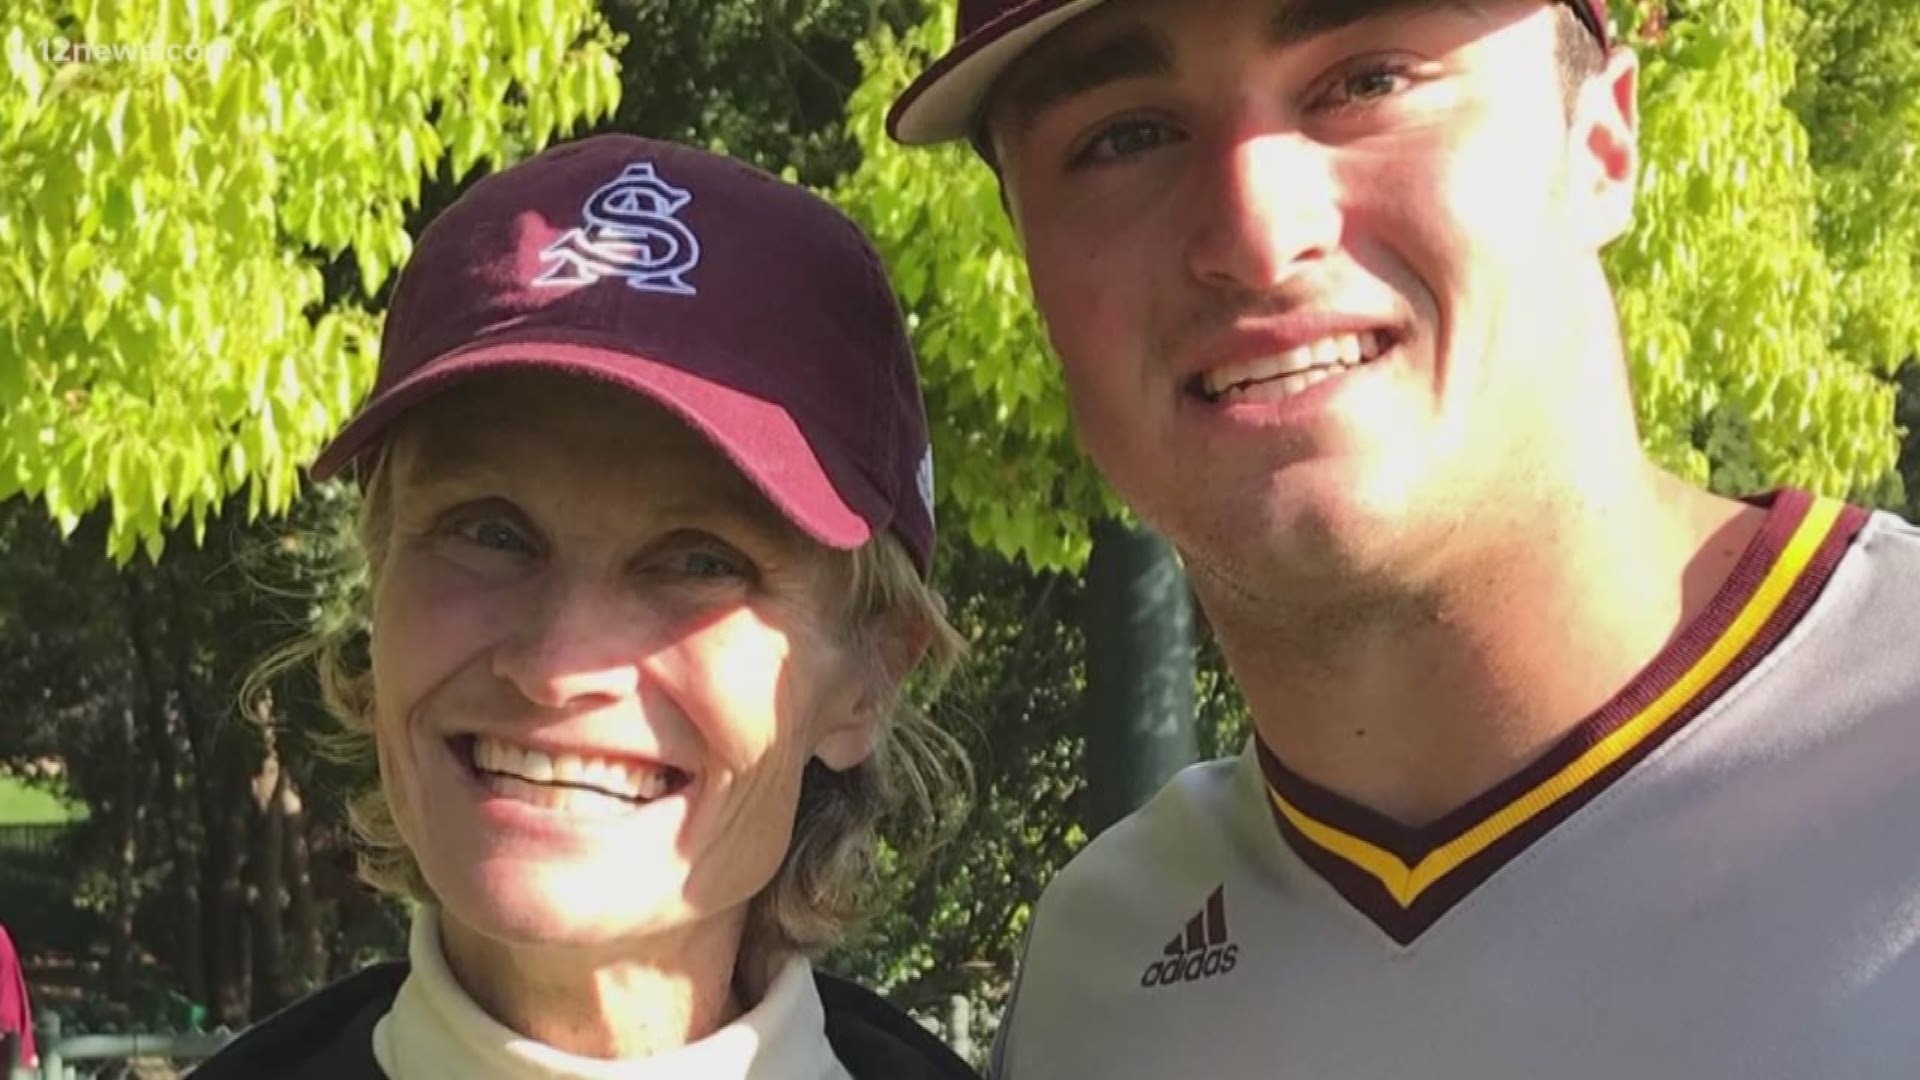 Hunter Bishop is passionate about the game of baseball, but his experience off the field is what drives him. In honor of his mother, who was diagnosed with Alzheimer's, he and his brothers have started a foundation in her honor.